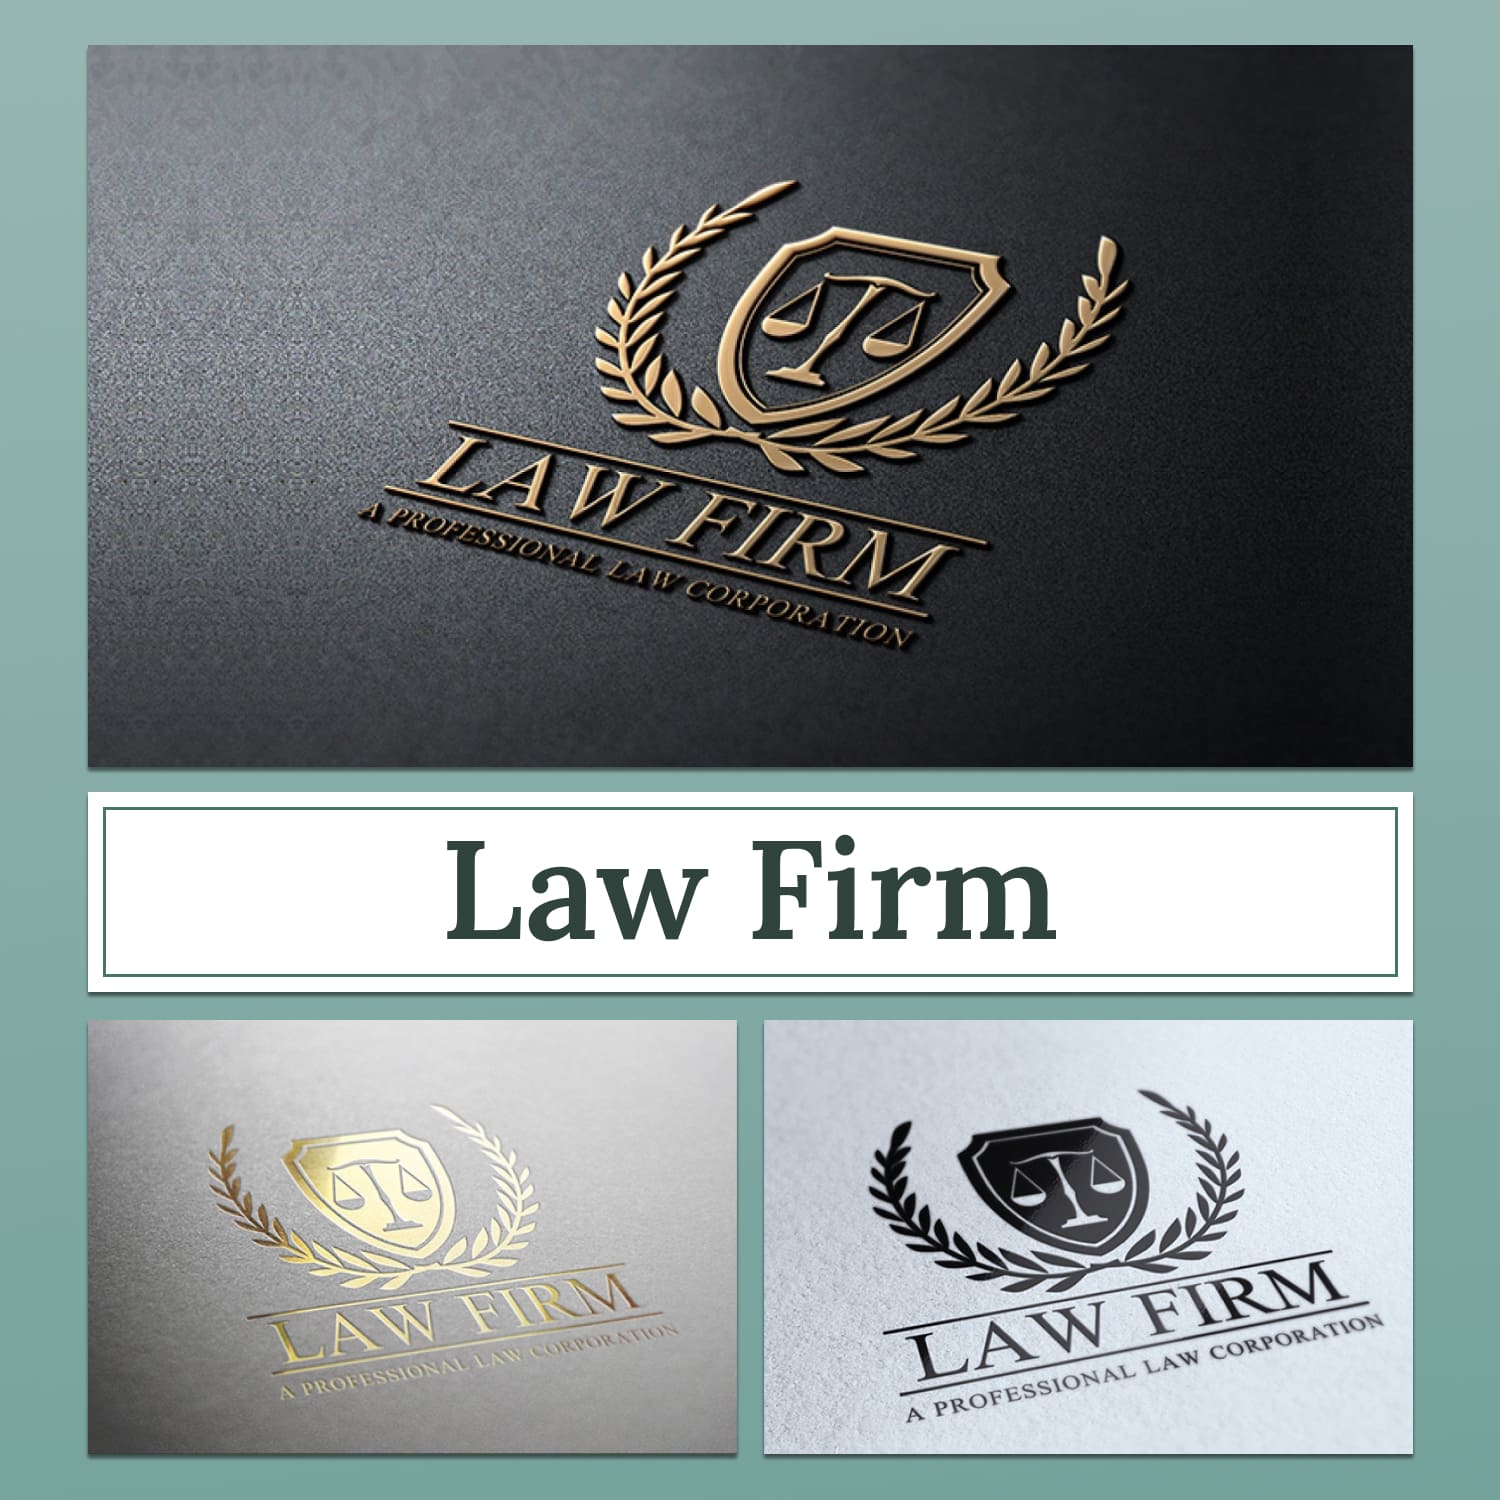 Law Firm Professional Logo Design cover image.